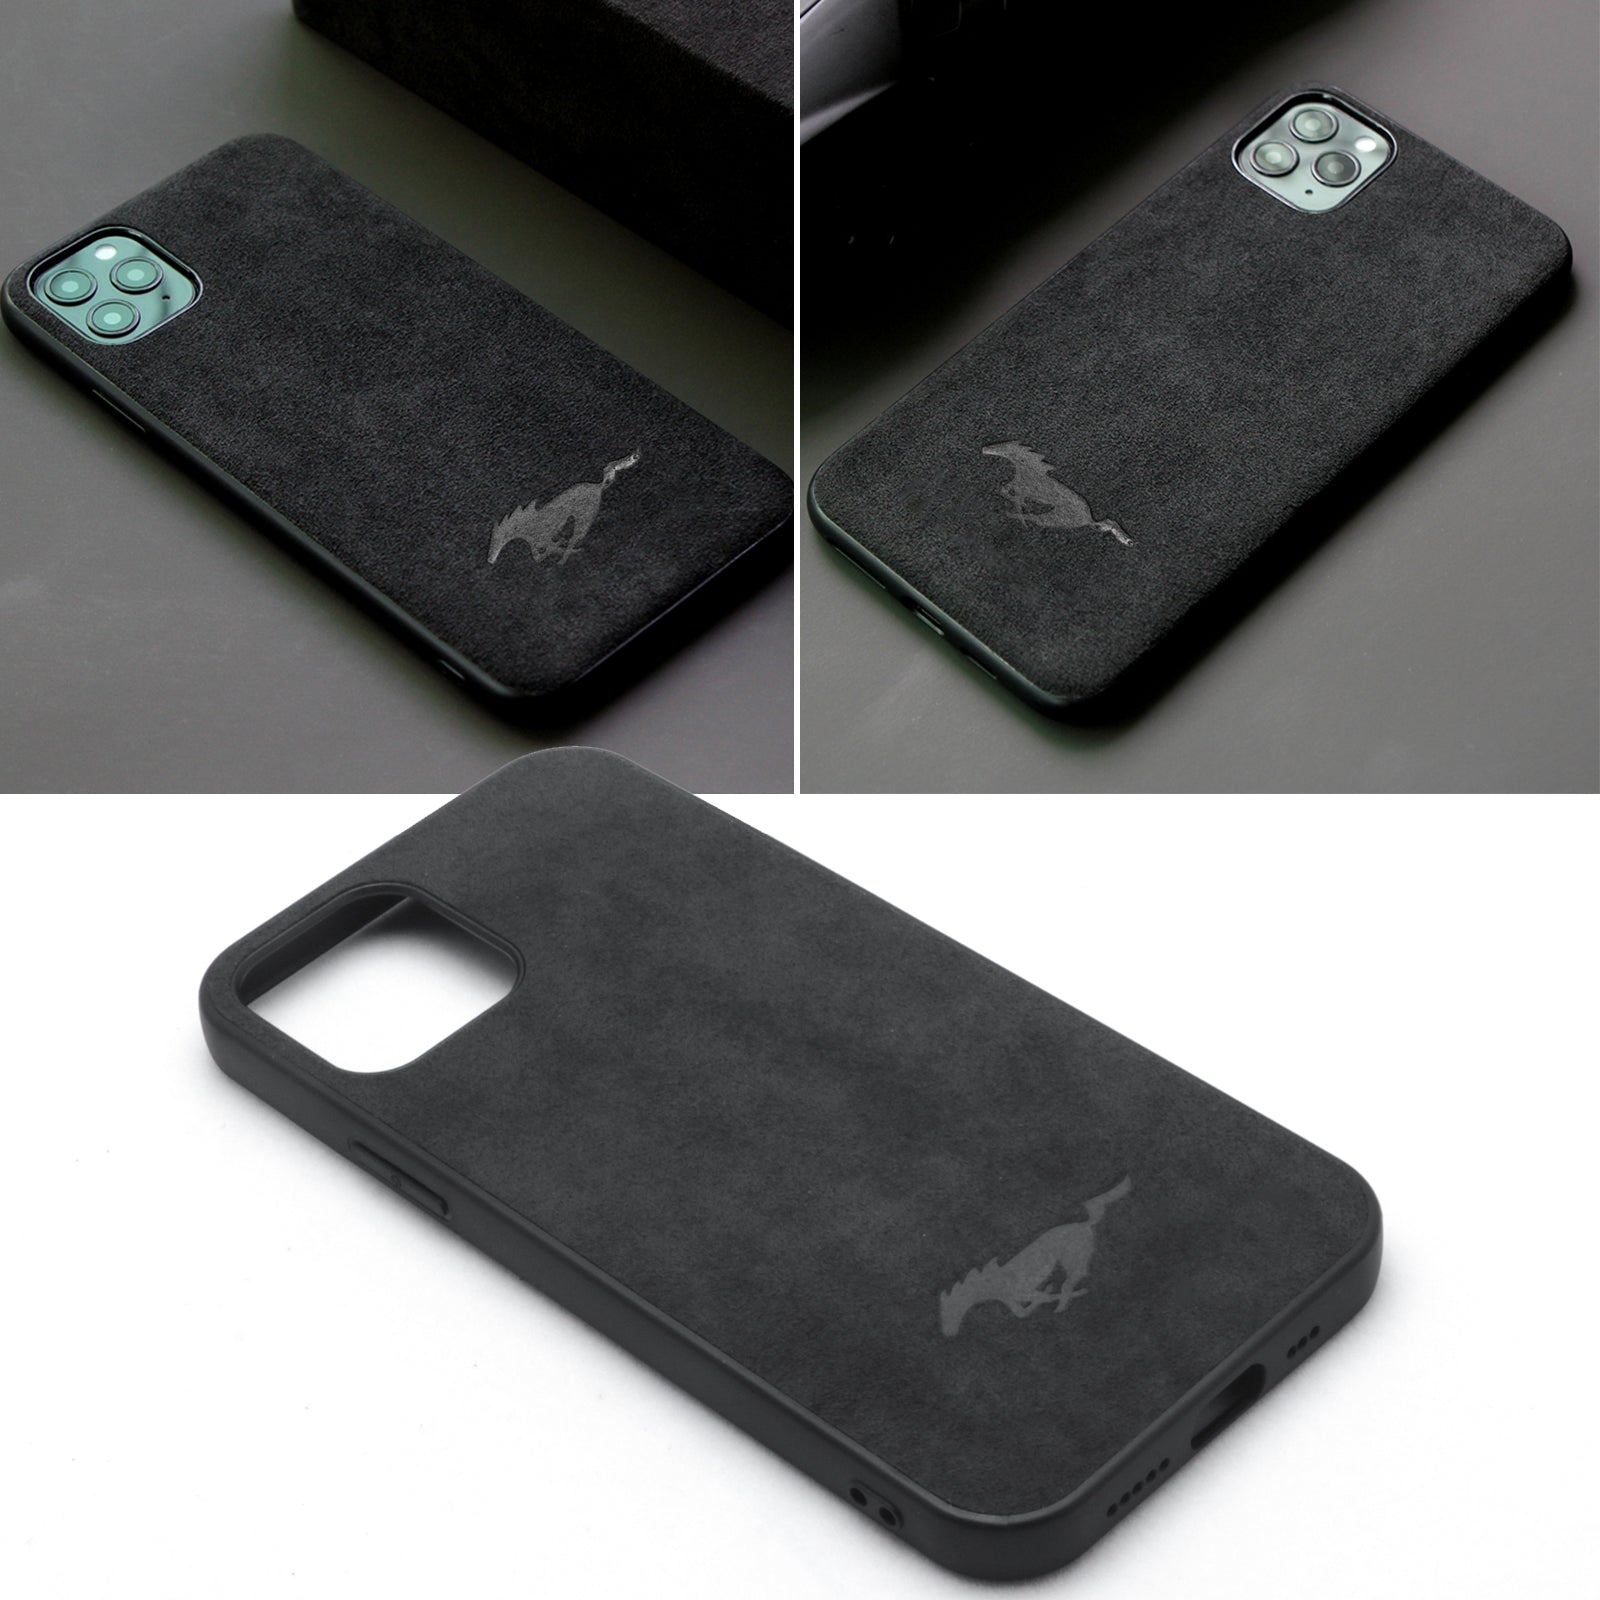 Source New Style custom shockproof suede leather phone cases for iphone  12/11/13 pro max for Alcantara case on m.